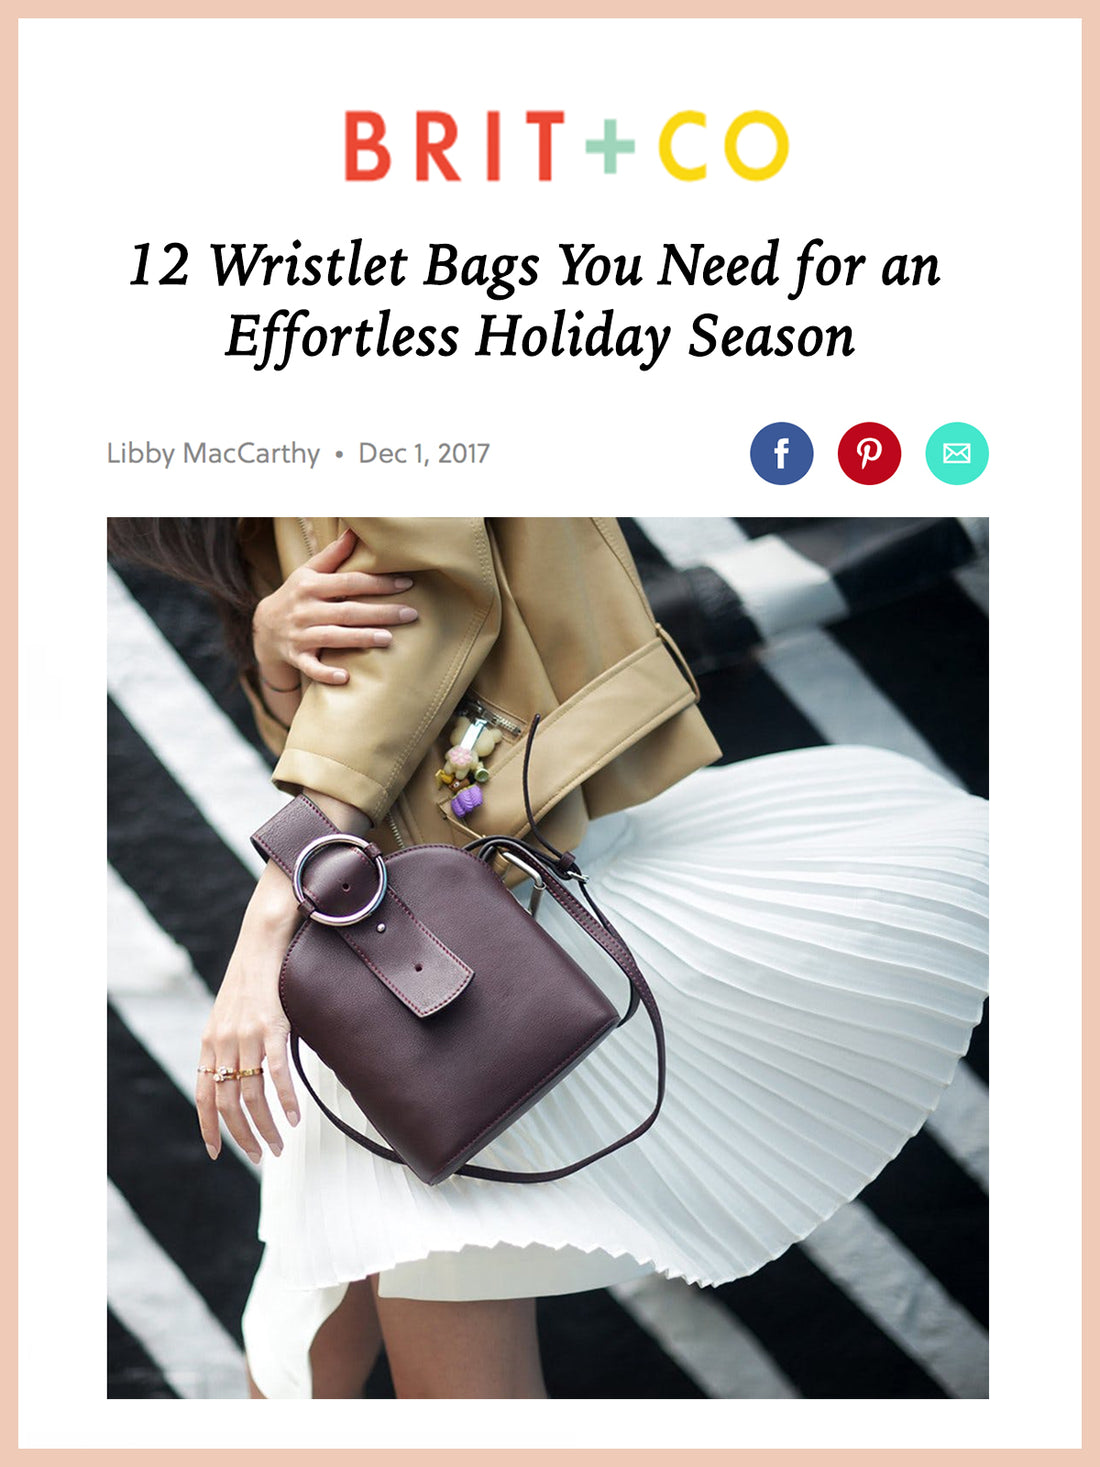 BRIT+CO, 12 Wristlet Bags You Need for an Effortless Holiday Season